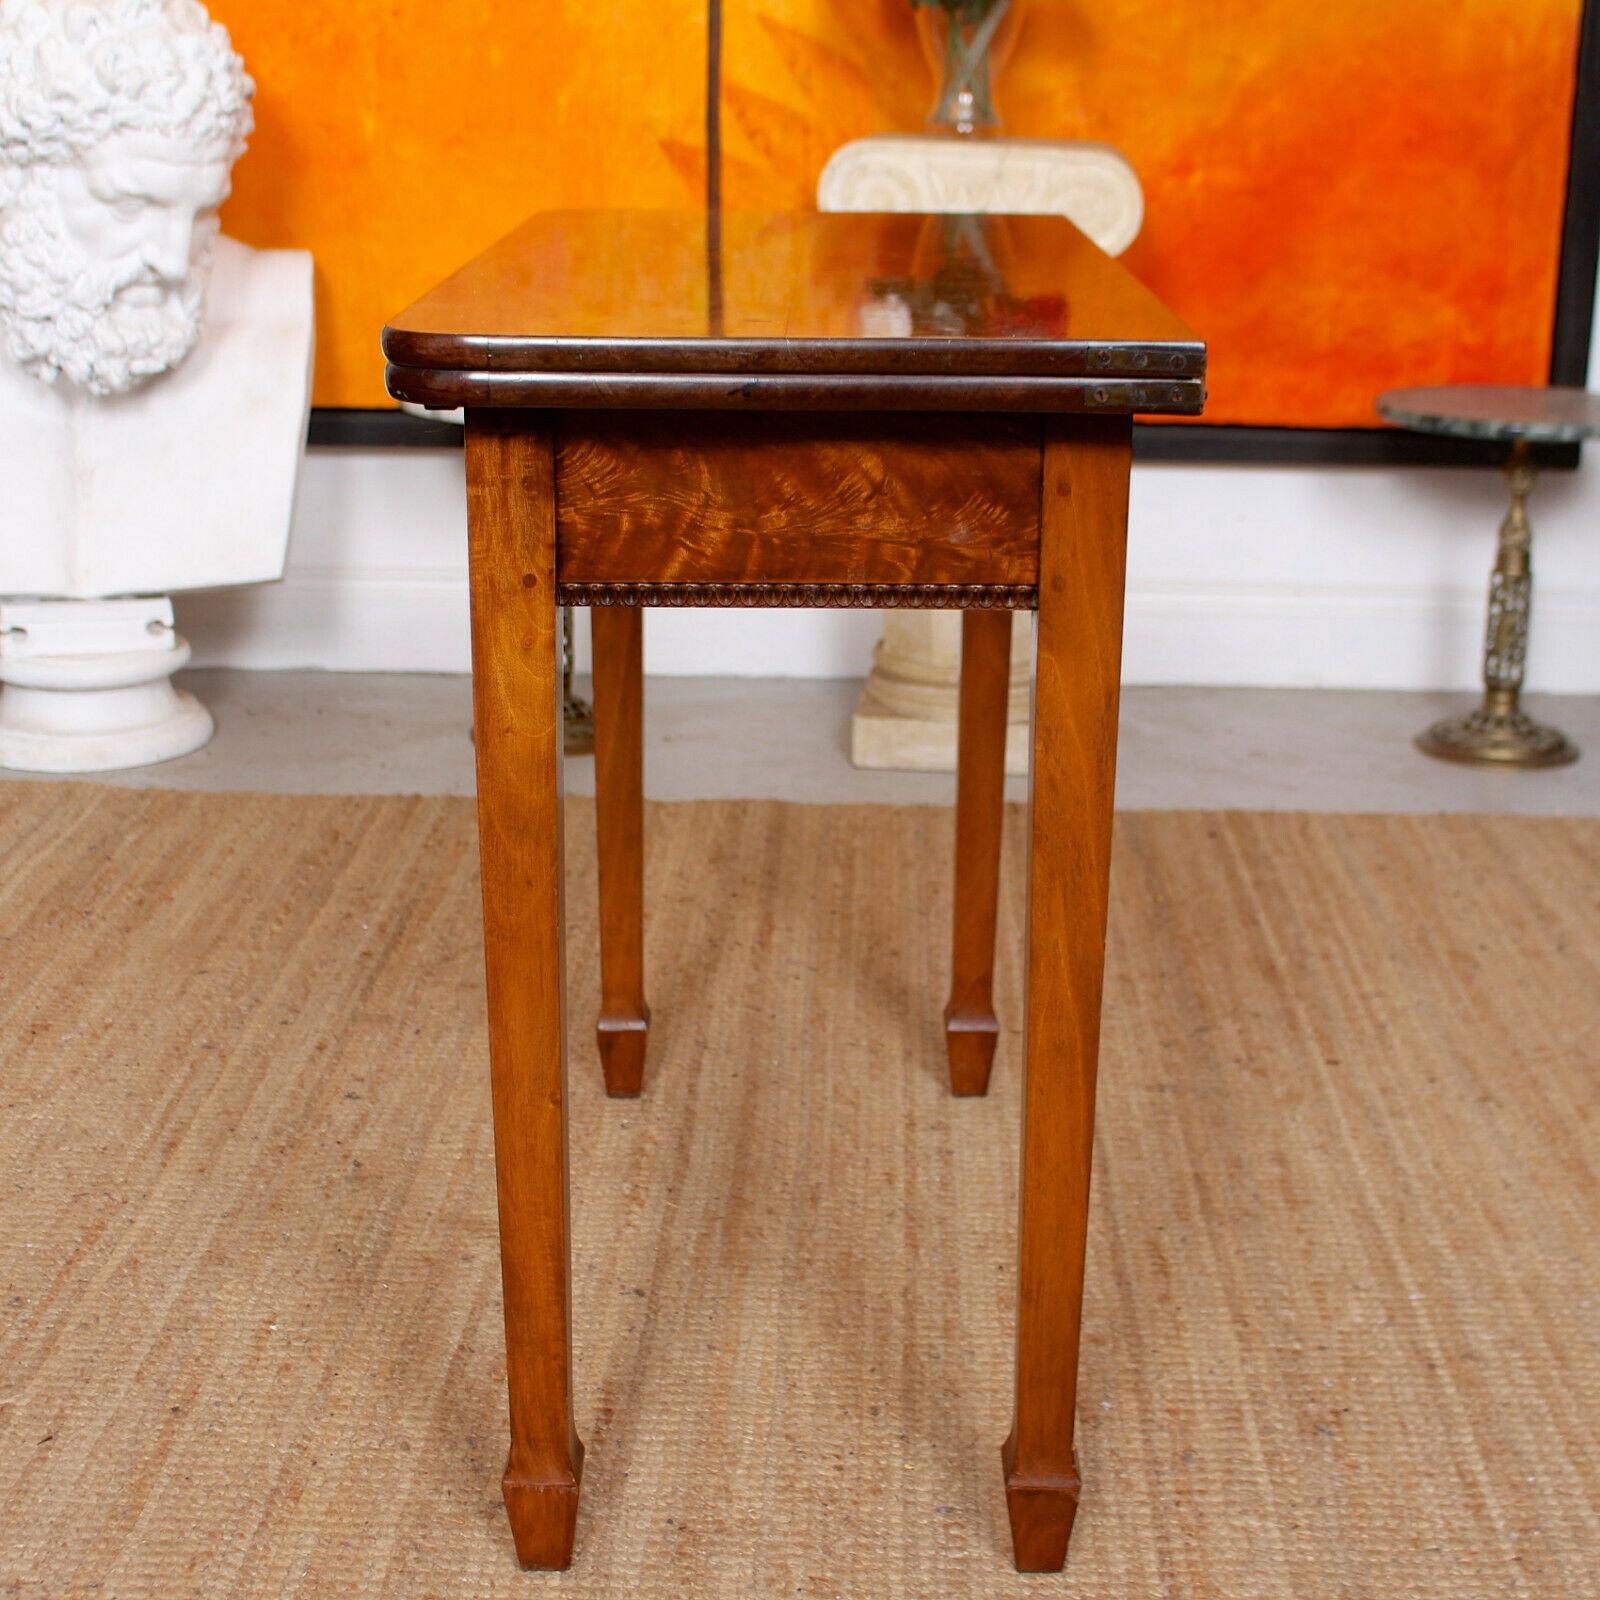 English Writing Table 19th Century Flamed Mahogany Folding Card Console Table For Sale 8